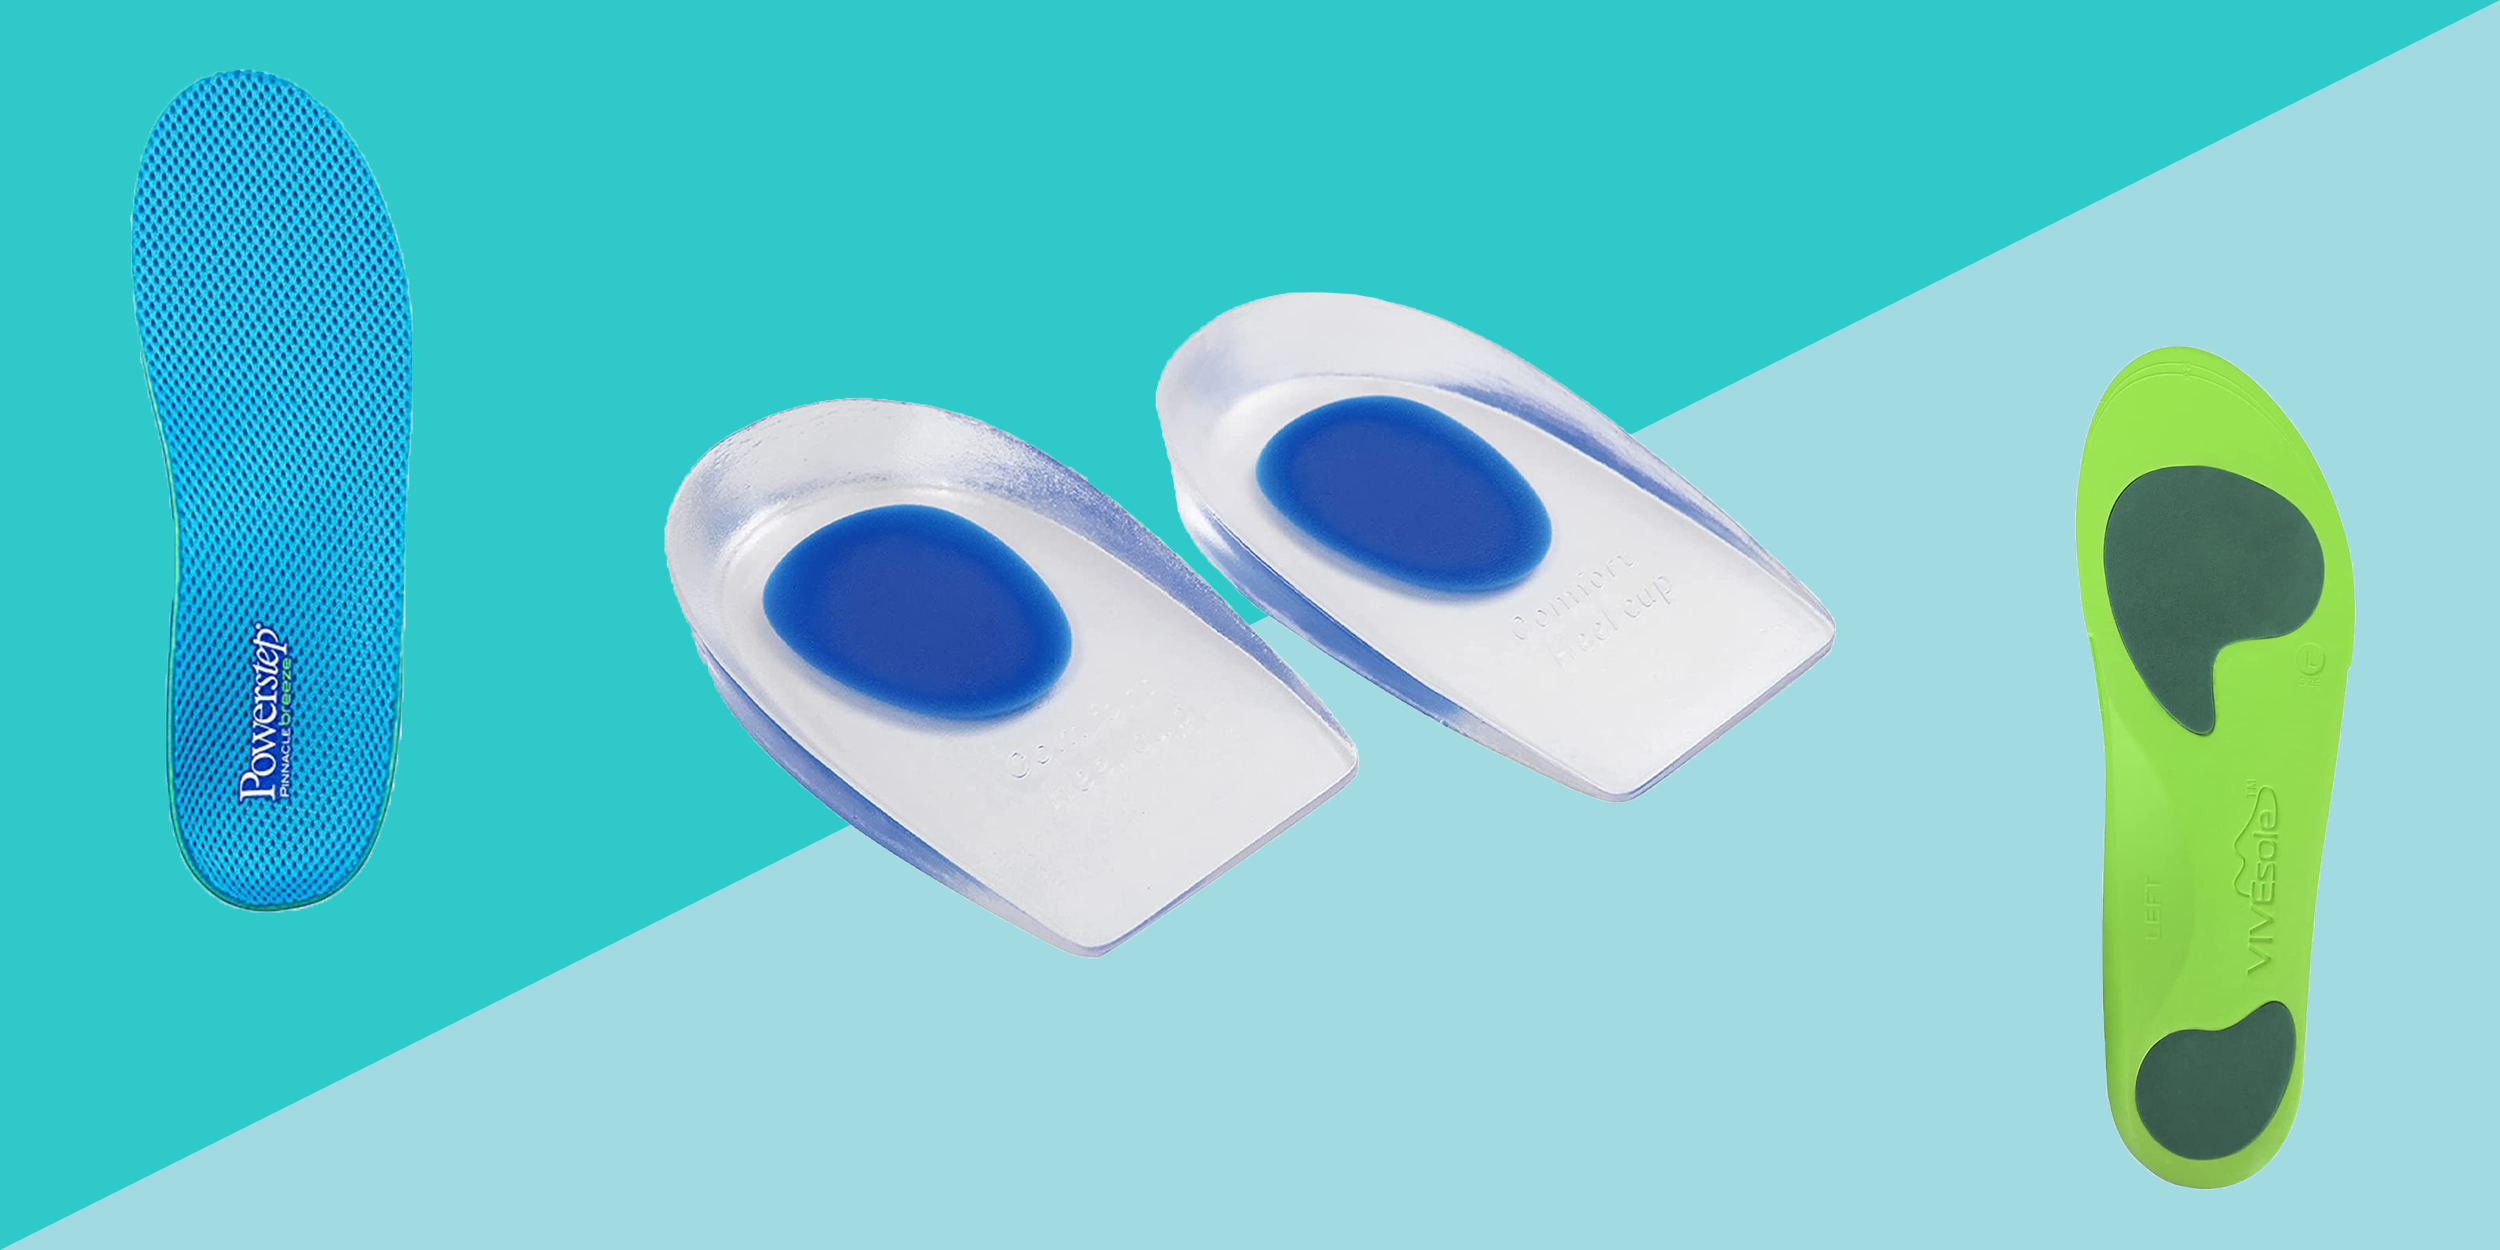 Inserts For Severe Flat Feet Heel Pain Metatarsal Pad Plantar Fasciitis Design For Men And Women Orthotic Insole Full length Medical Grade Trimmable With Arch Support 